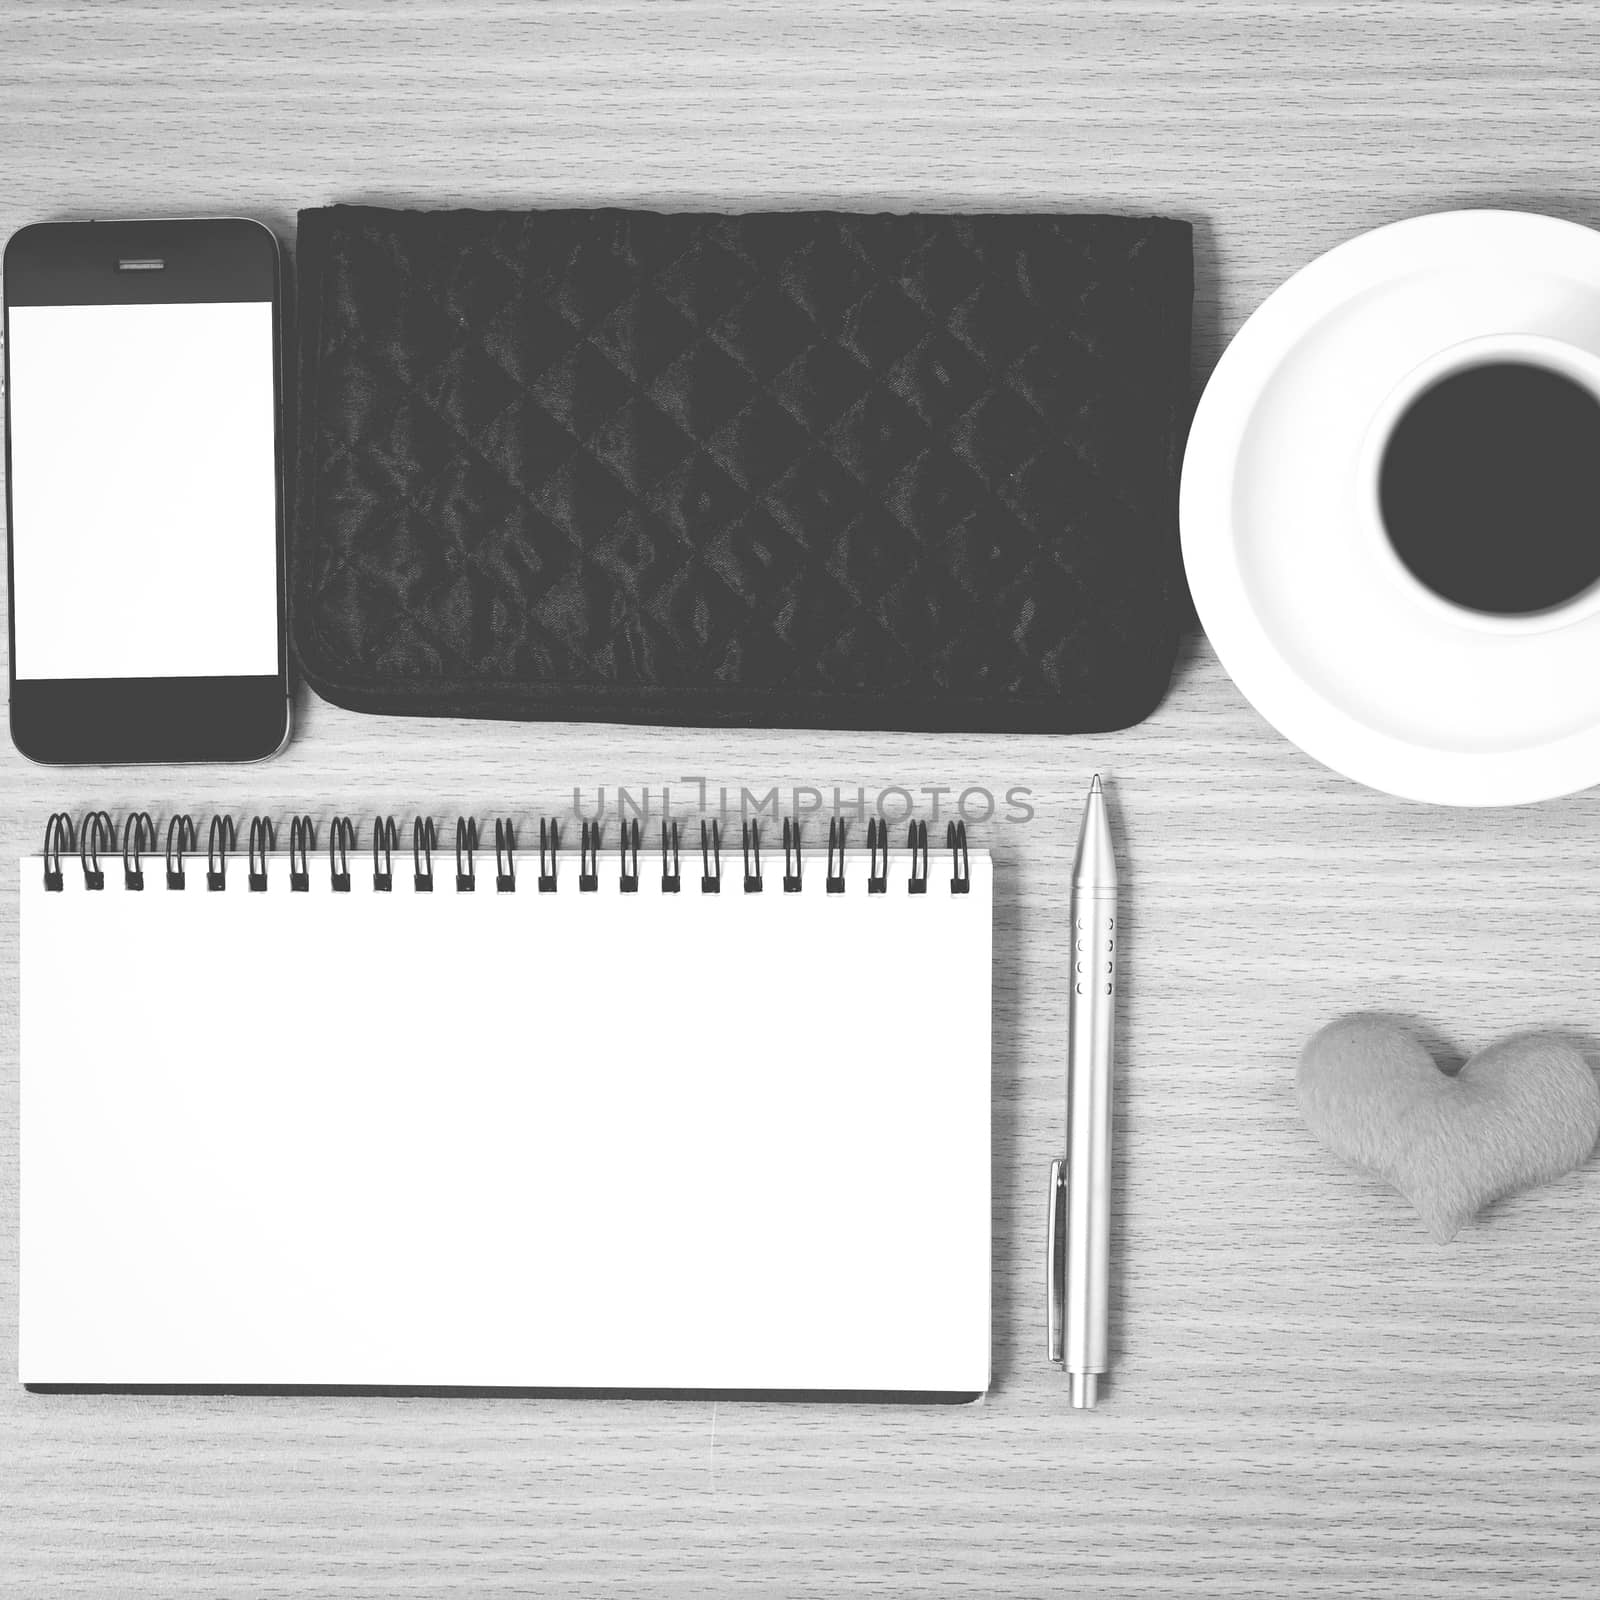 desktop : coffee with phone,notepad,wallet,heart on wood background black and white color